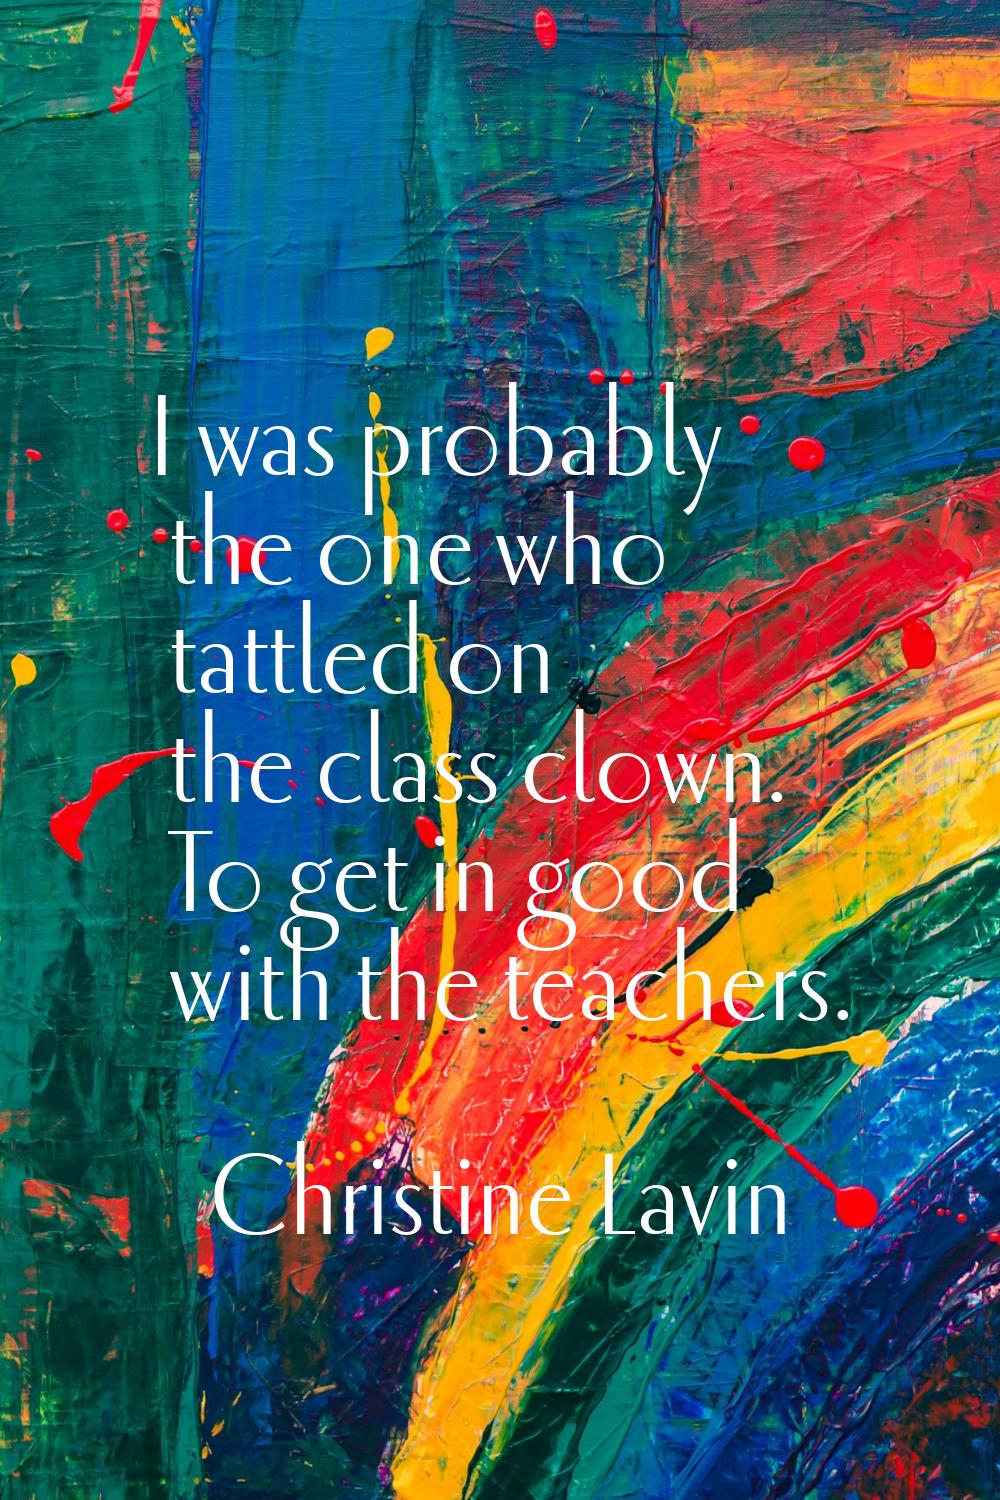 I was probably the one who tattled on the class clown. To get in good with the teachers.